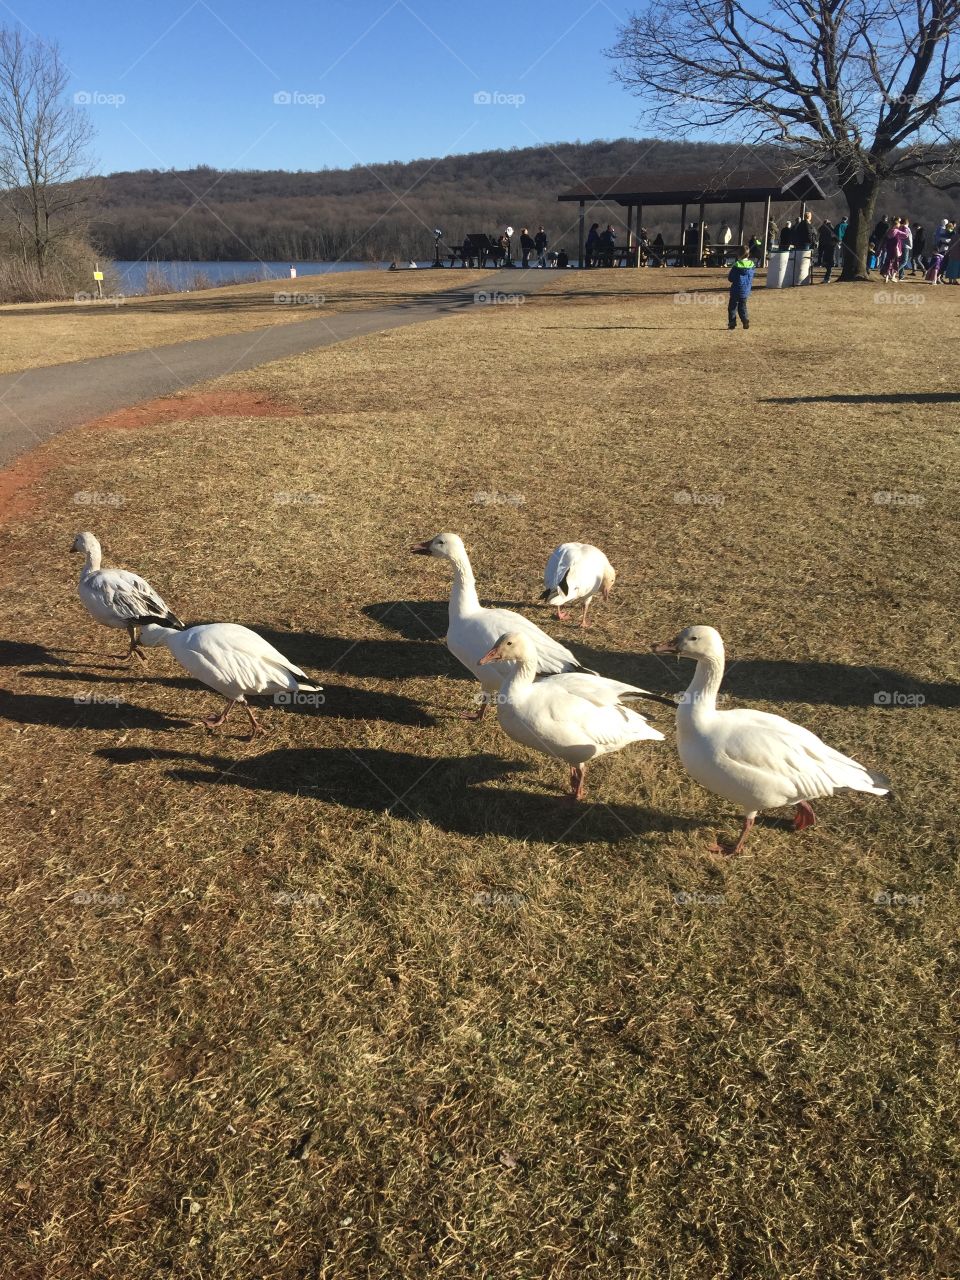 Snow geese everywhere but these 6 were friendly and were just minding their business 